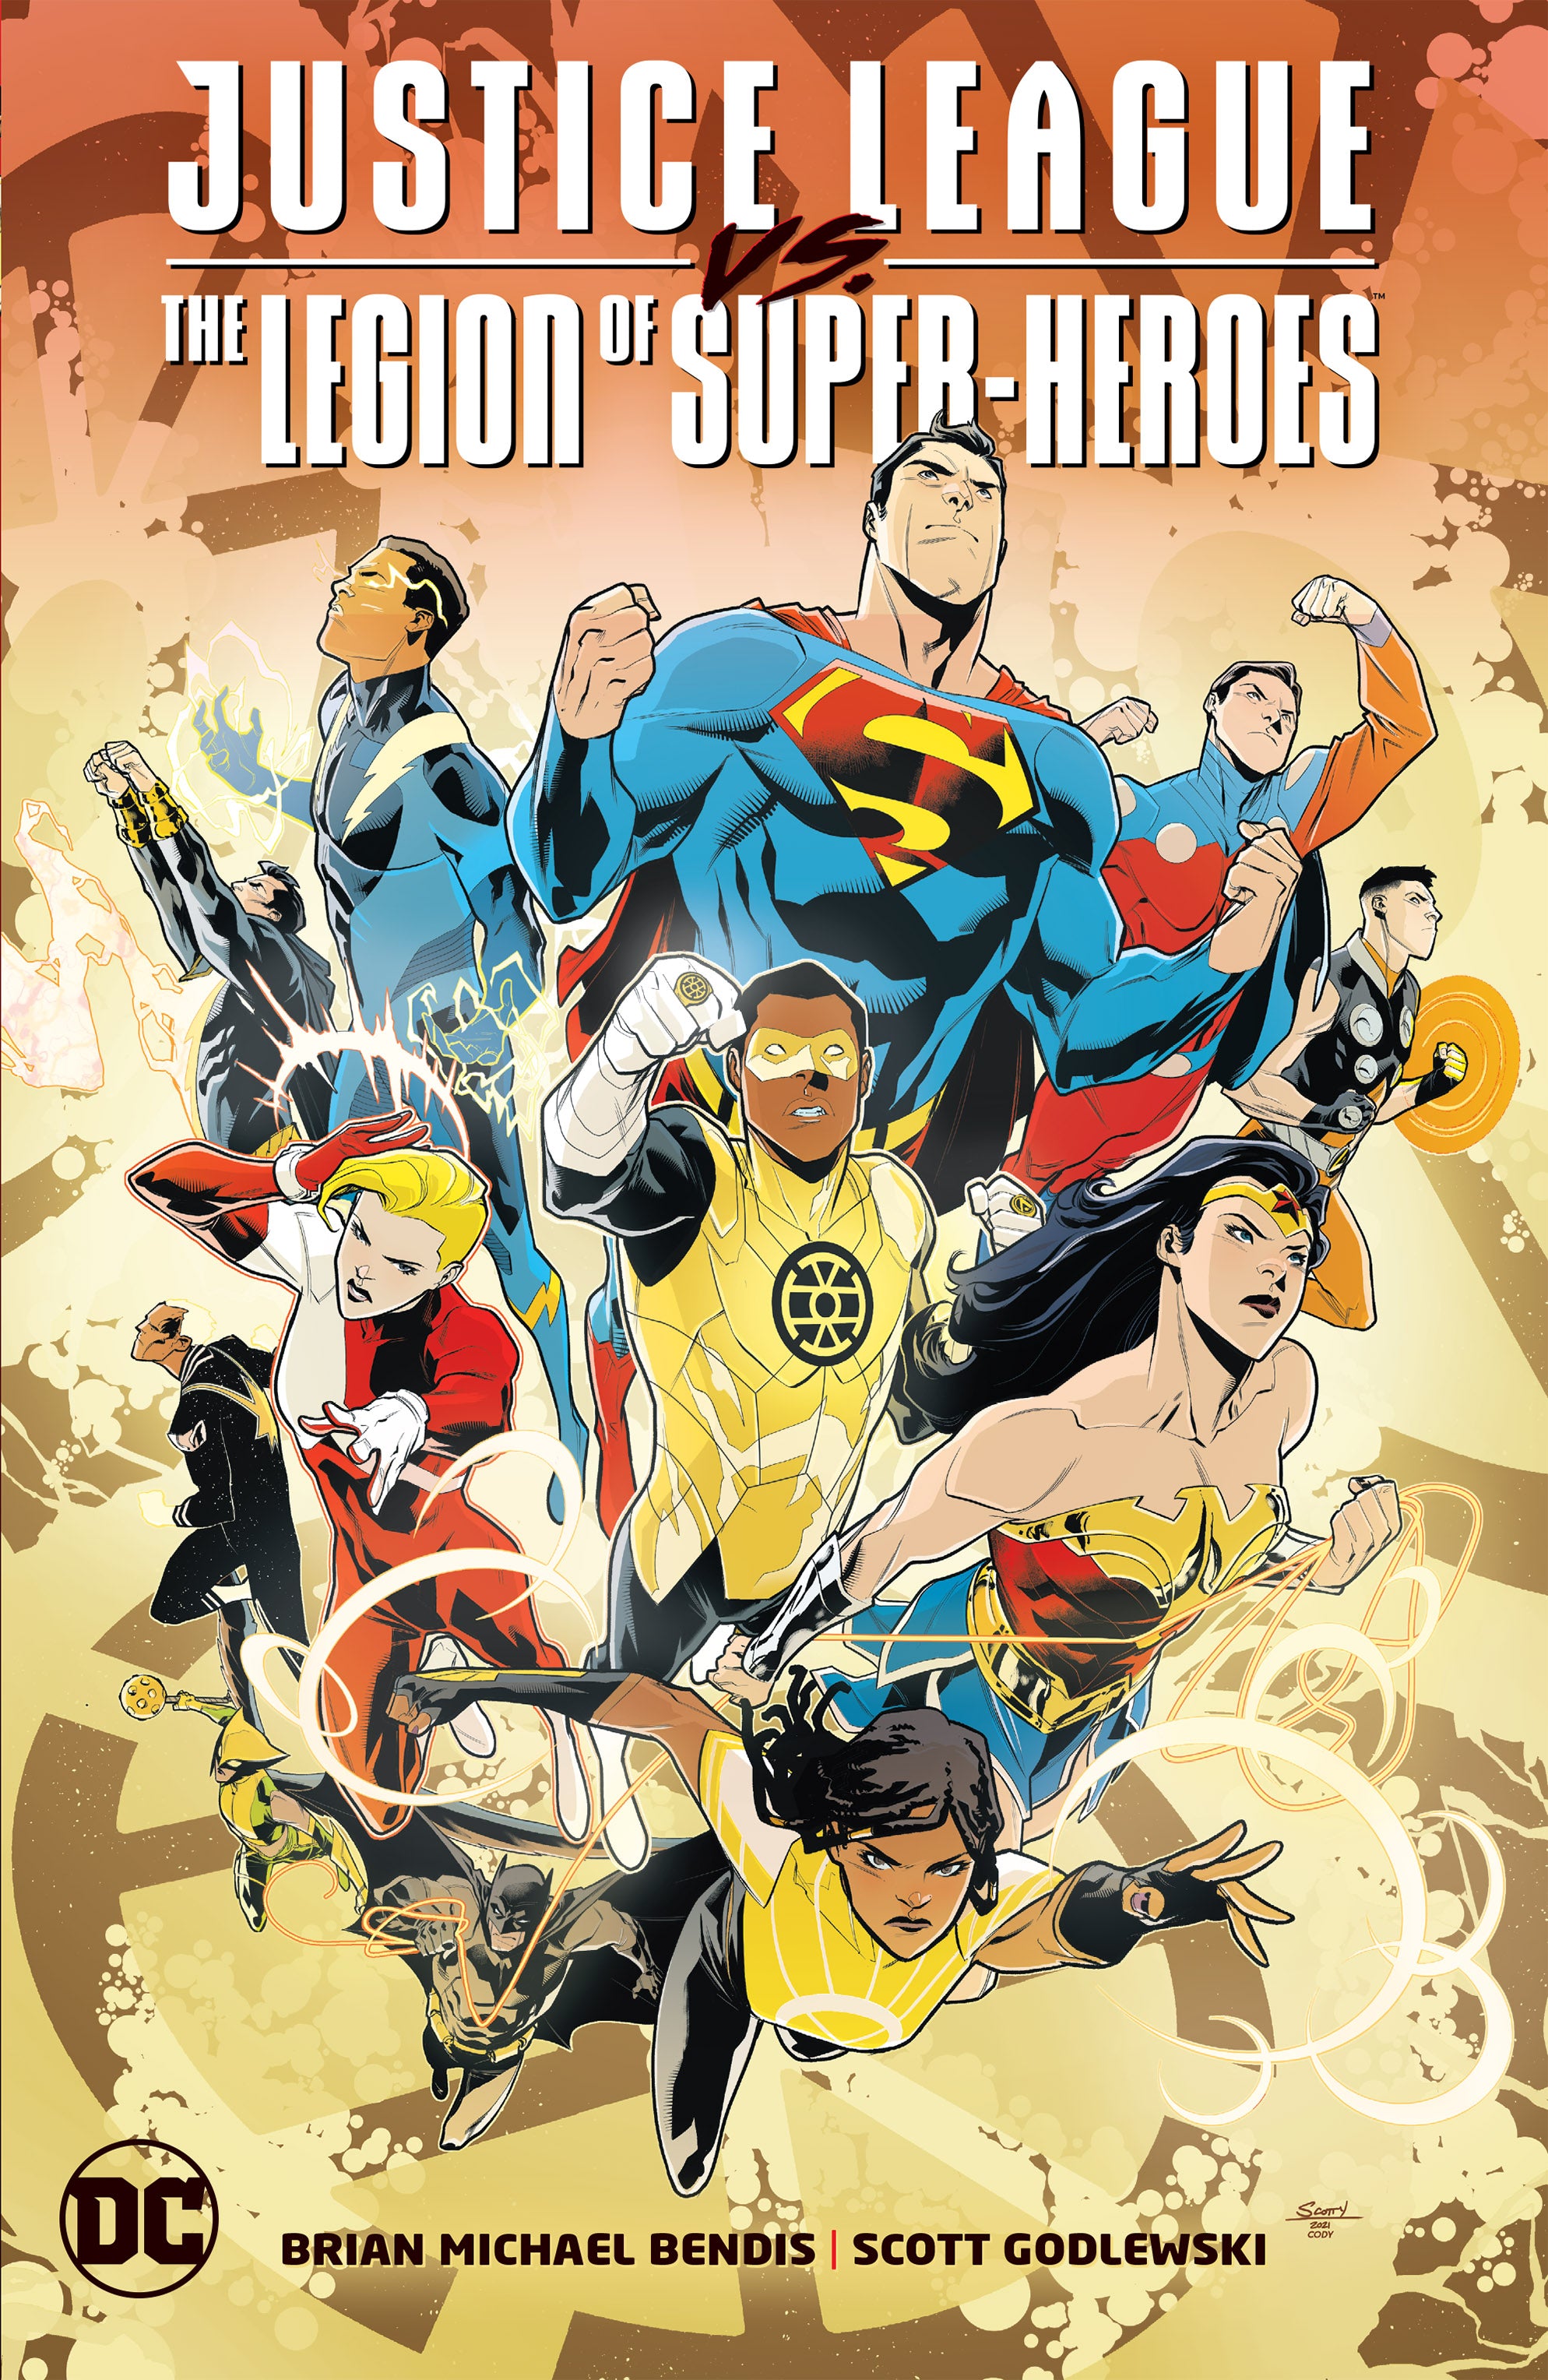 JUSTICE LEAGUE VS THE LEGION OF SUPER-HEROES TRADE PAPERBACK